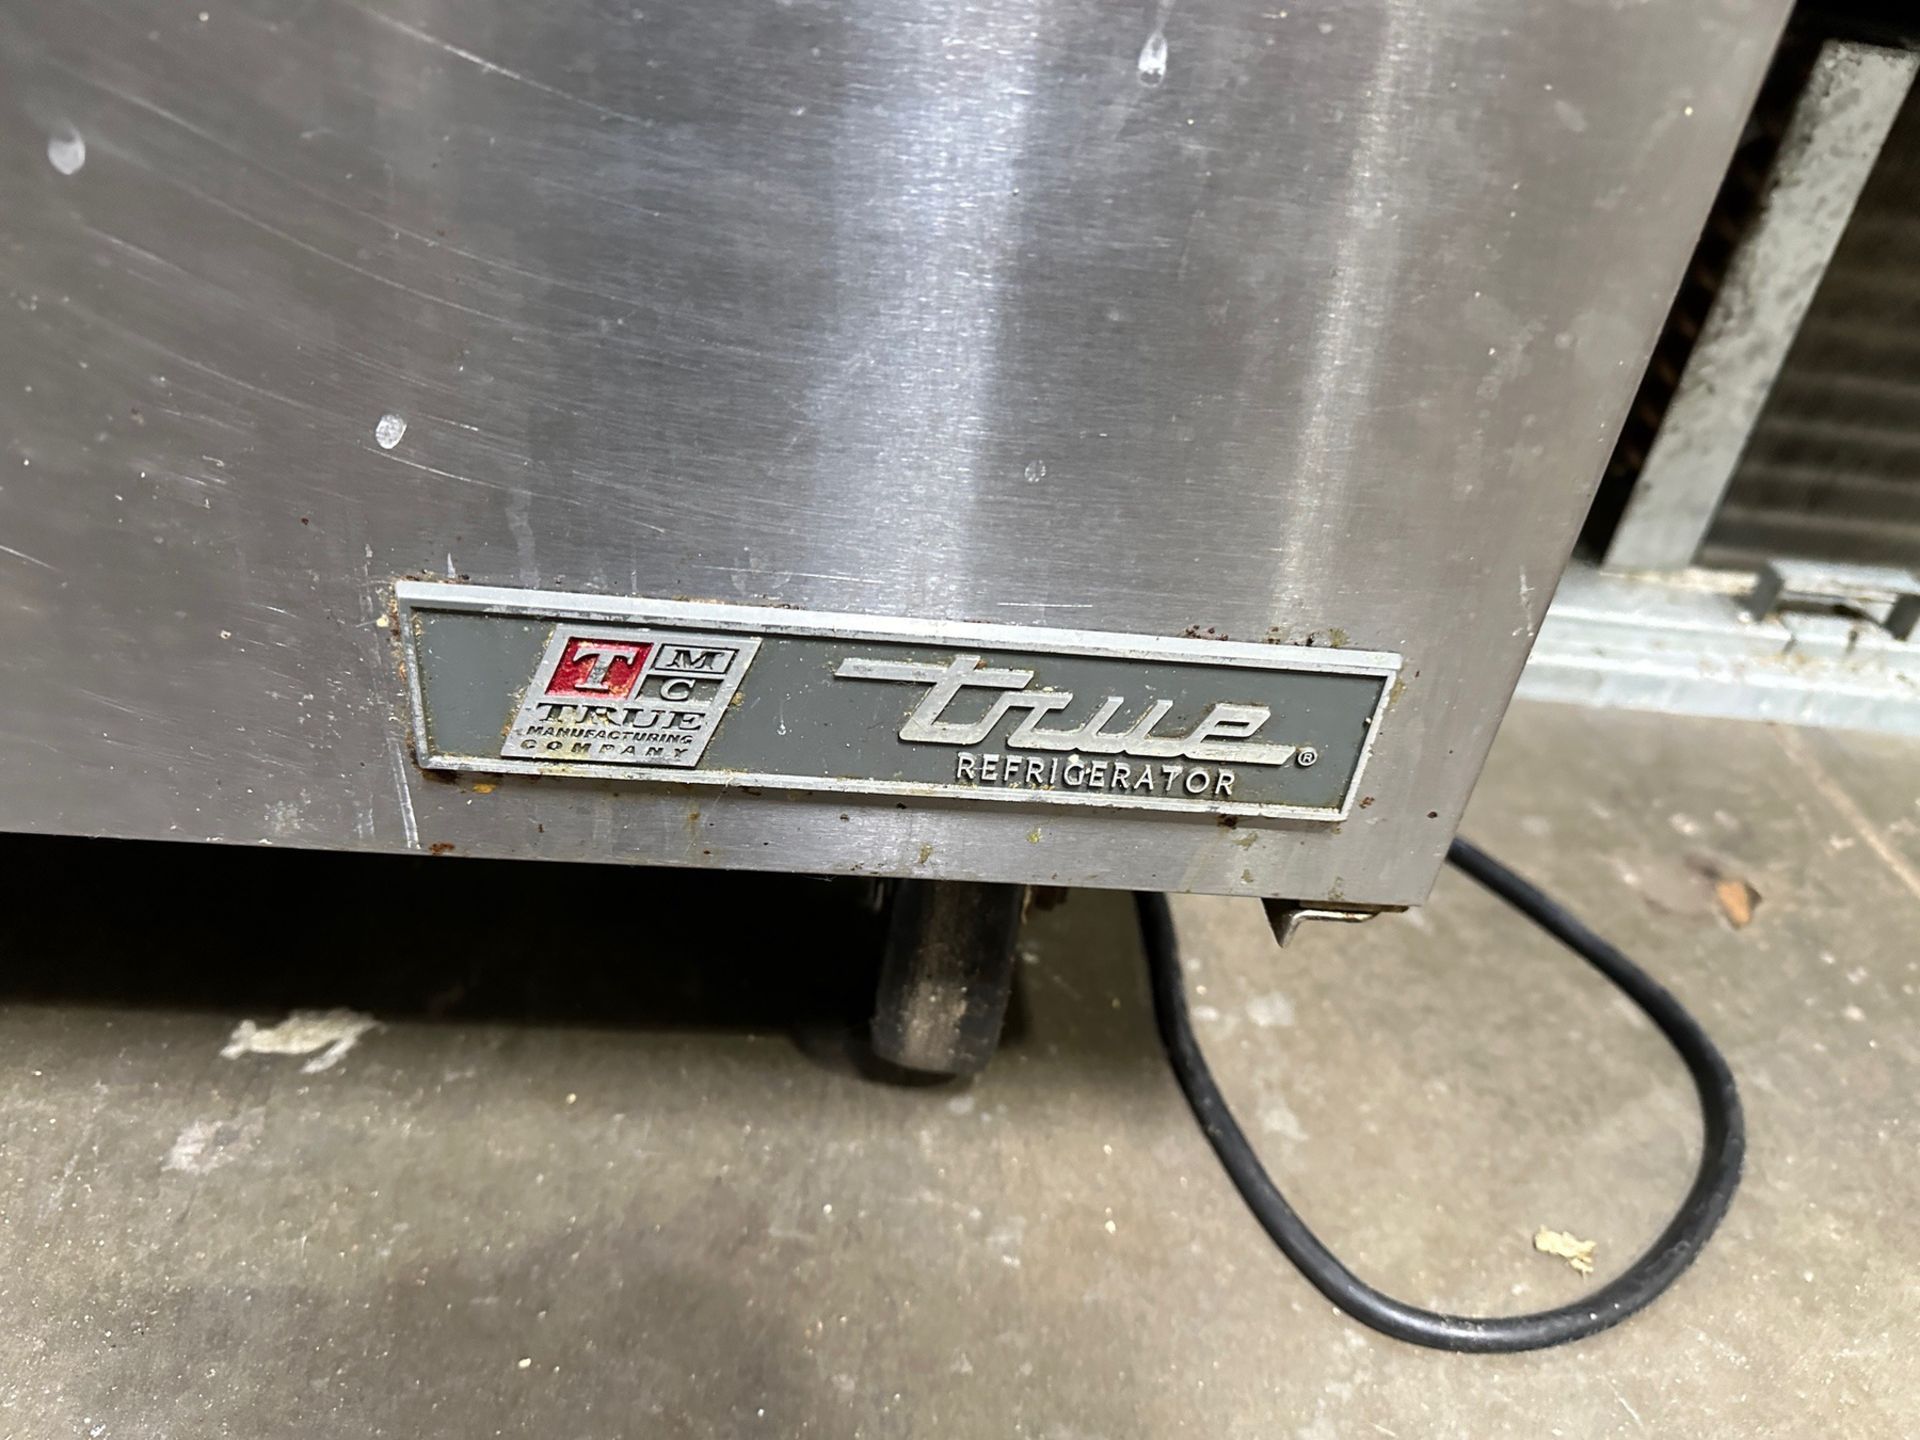 True Refrigeration Stainless Steel Refrigerated Prep Station | Rig Fee $100 - Image 2 of 6